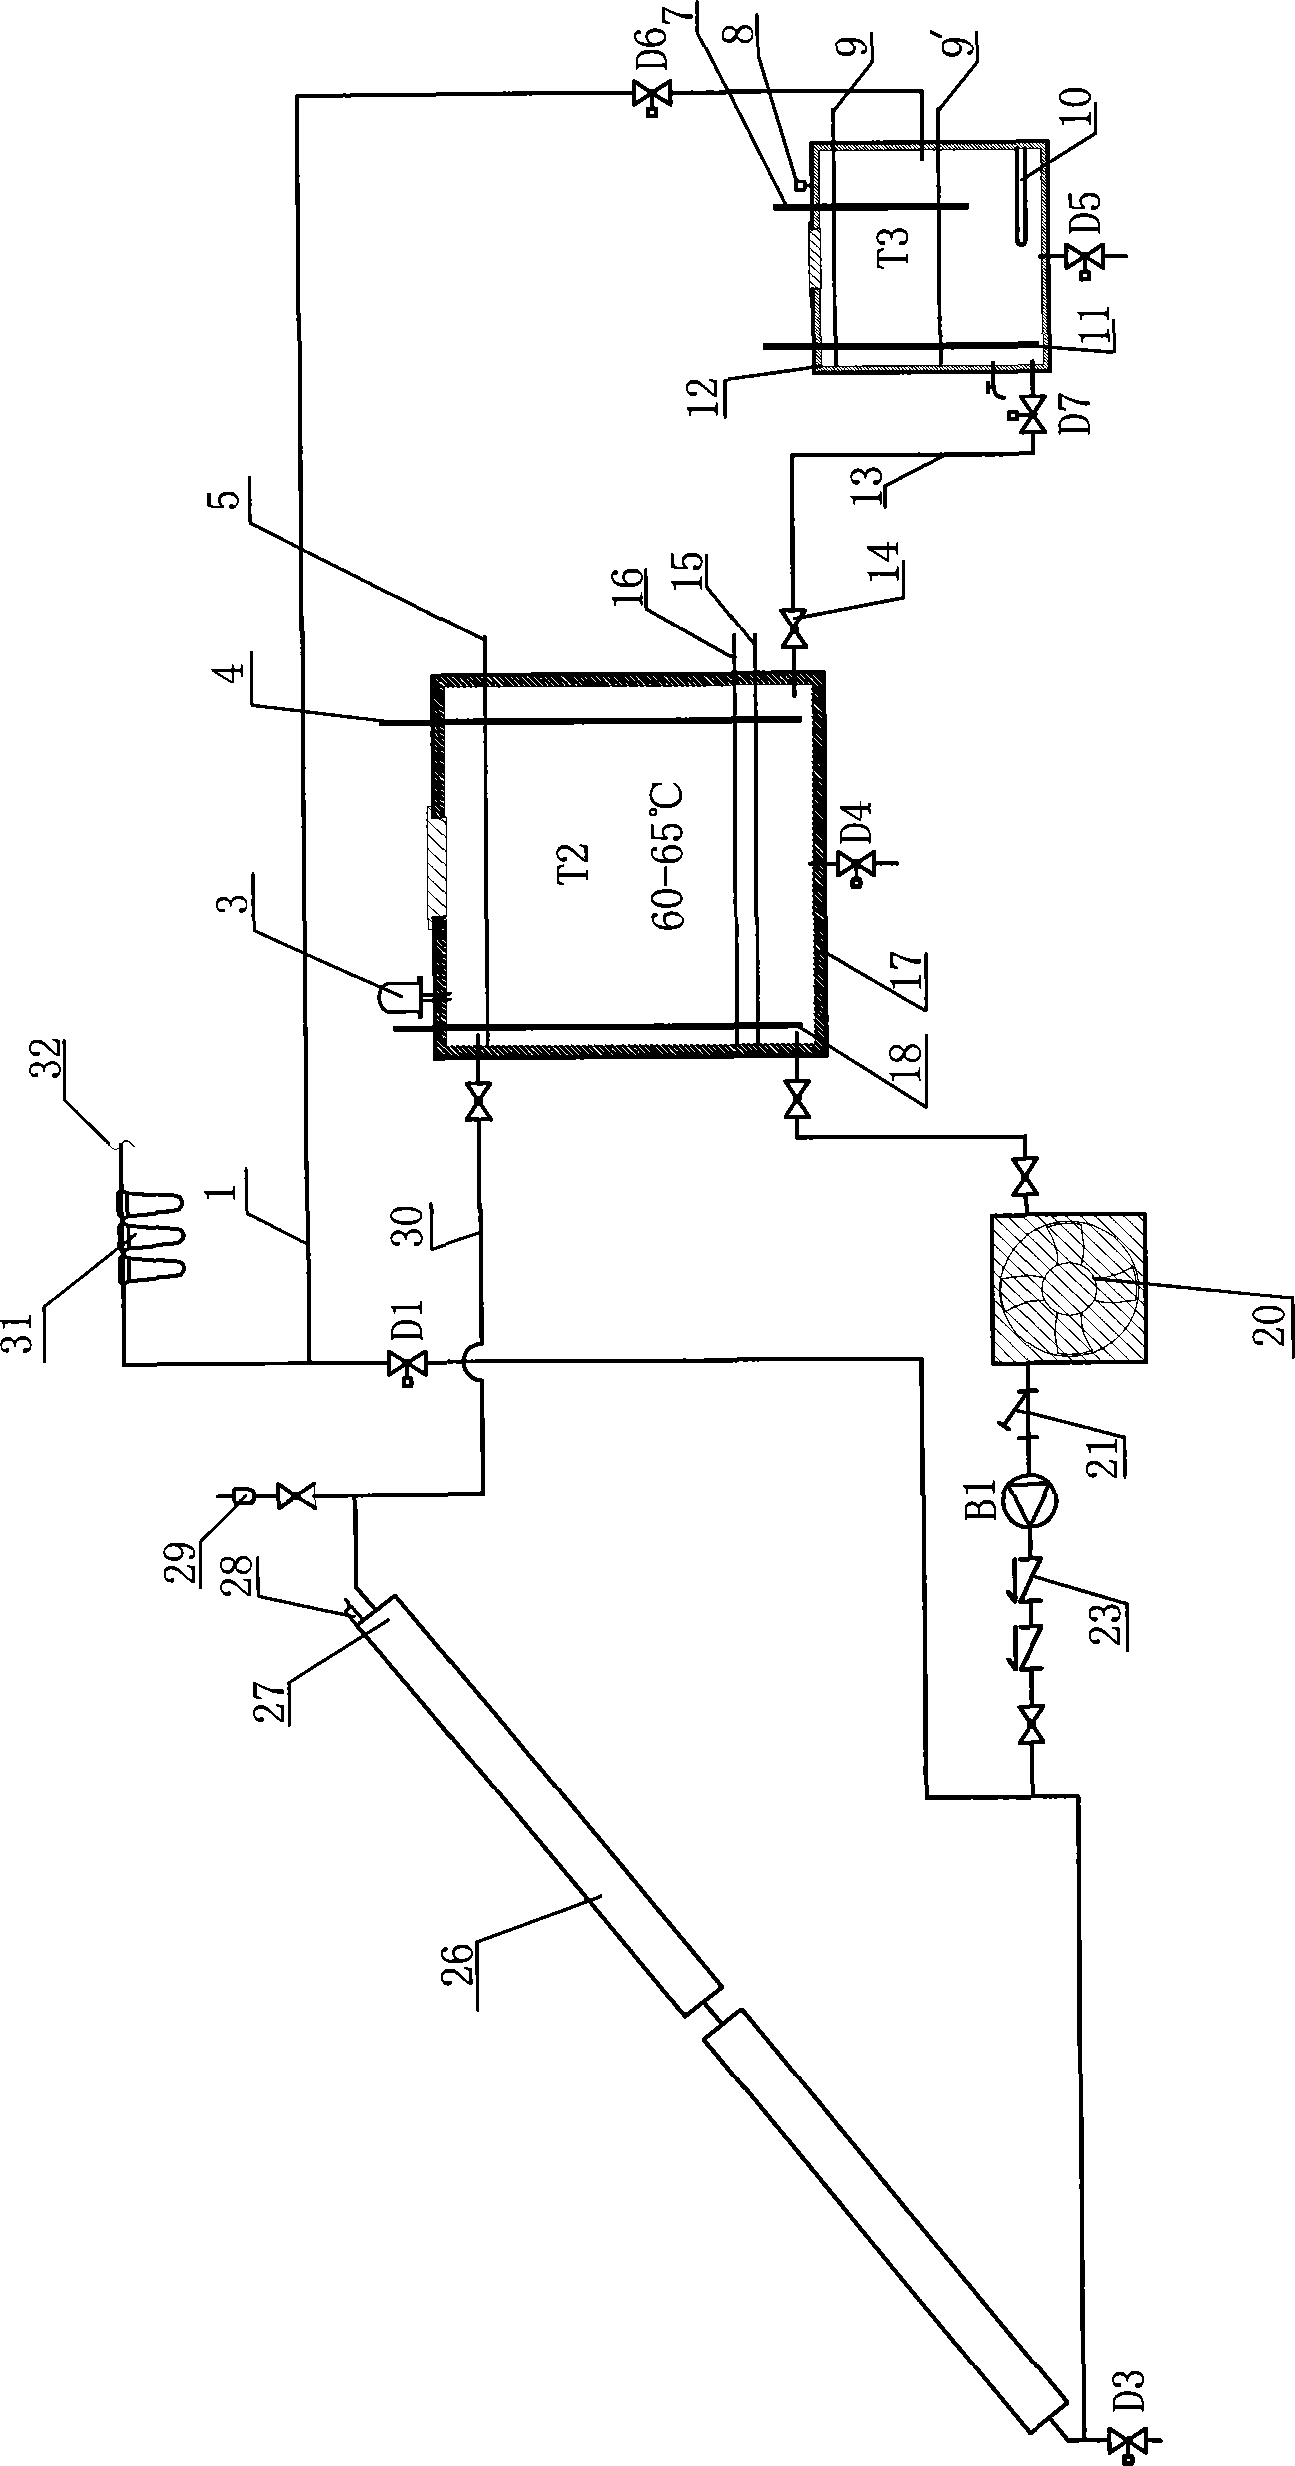 Solar potable water preparation system and method for preparing potable water by using solar potable water preparation system